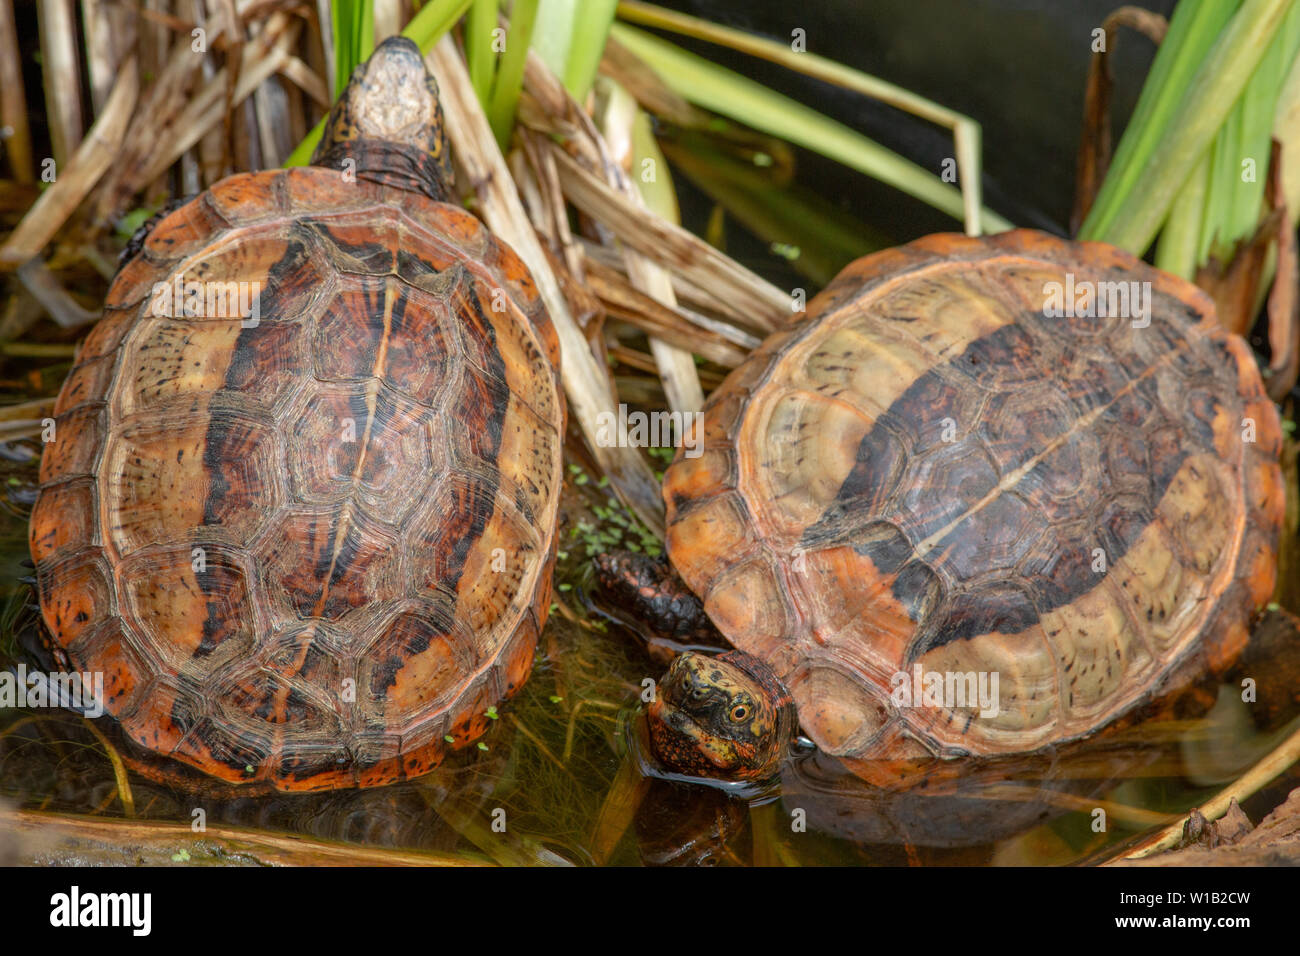 Indochinese or Flowered Box Turtles (Cuora galbinifrons). Two basking alongside one another. Critically endangered species. Stock Photo